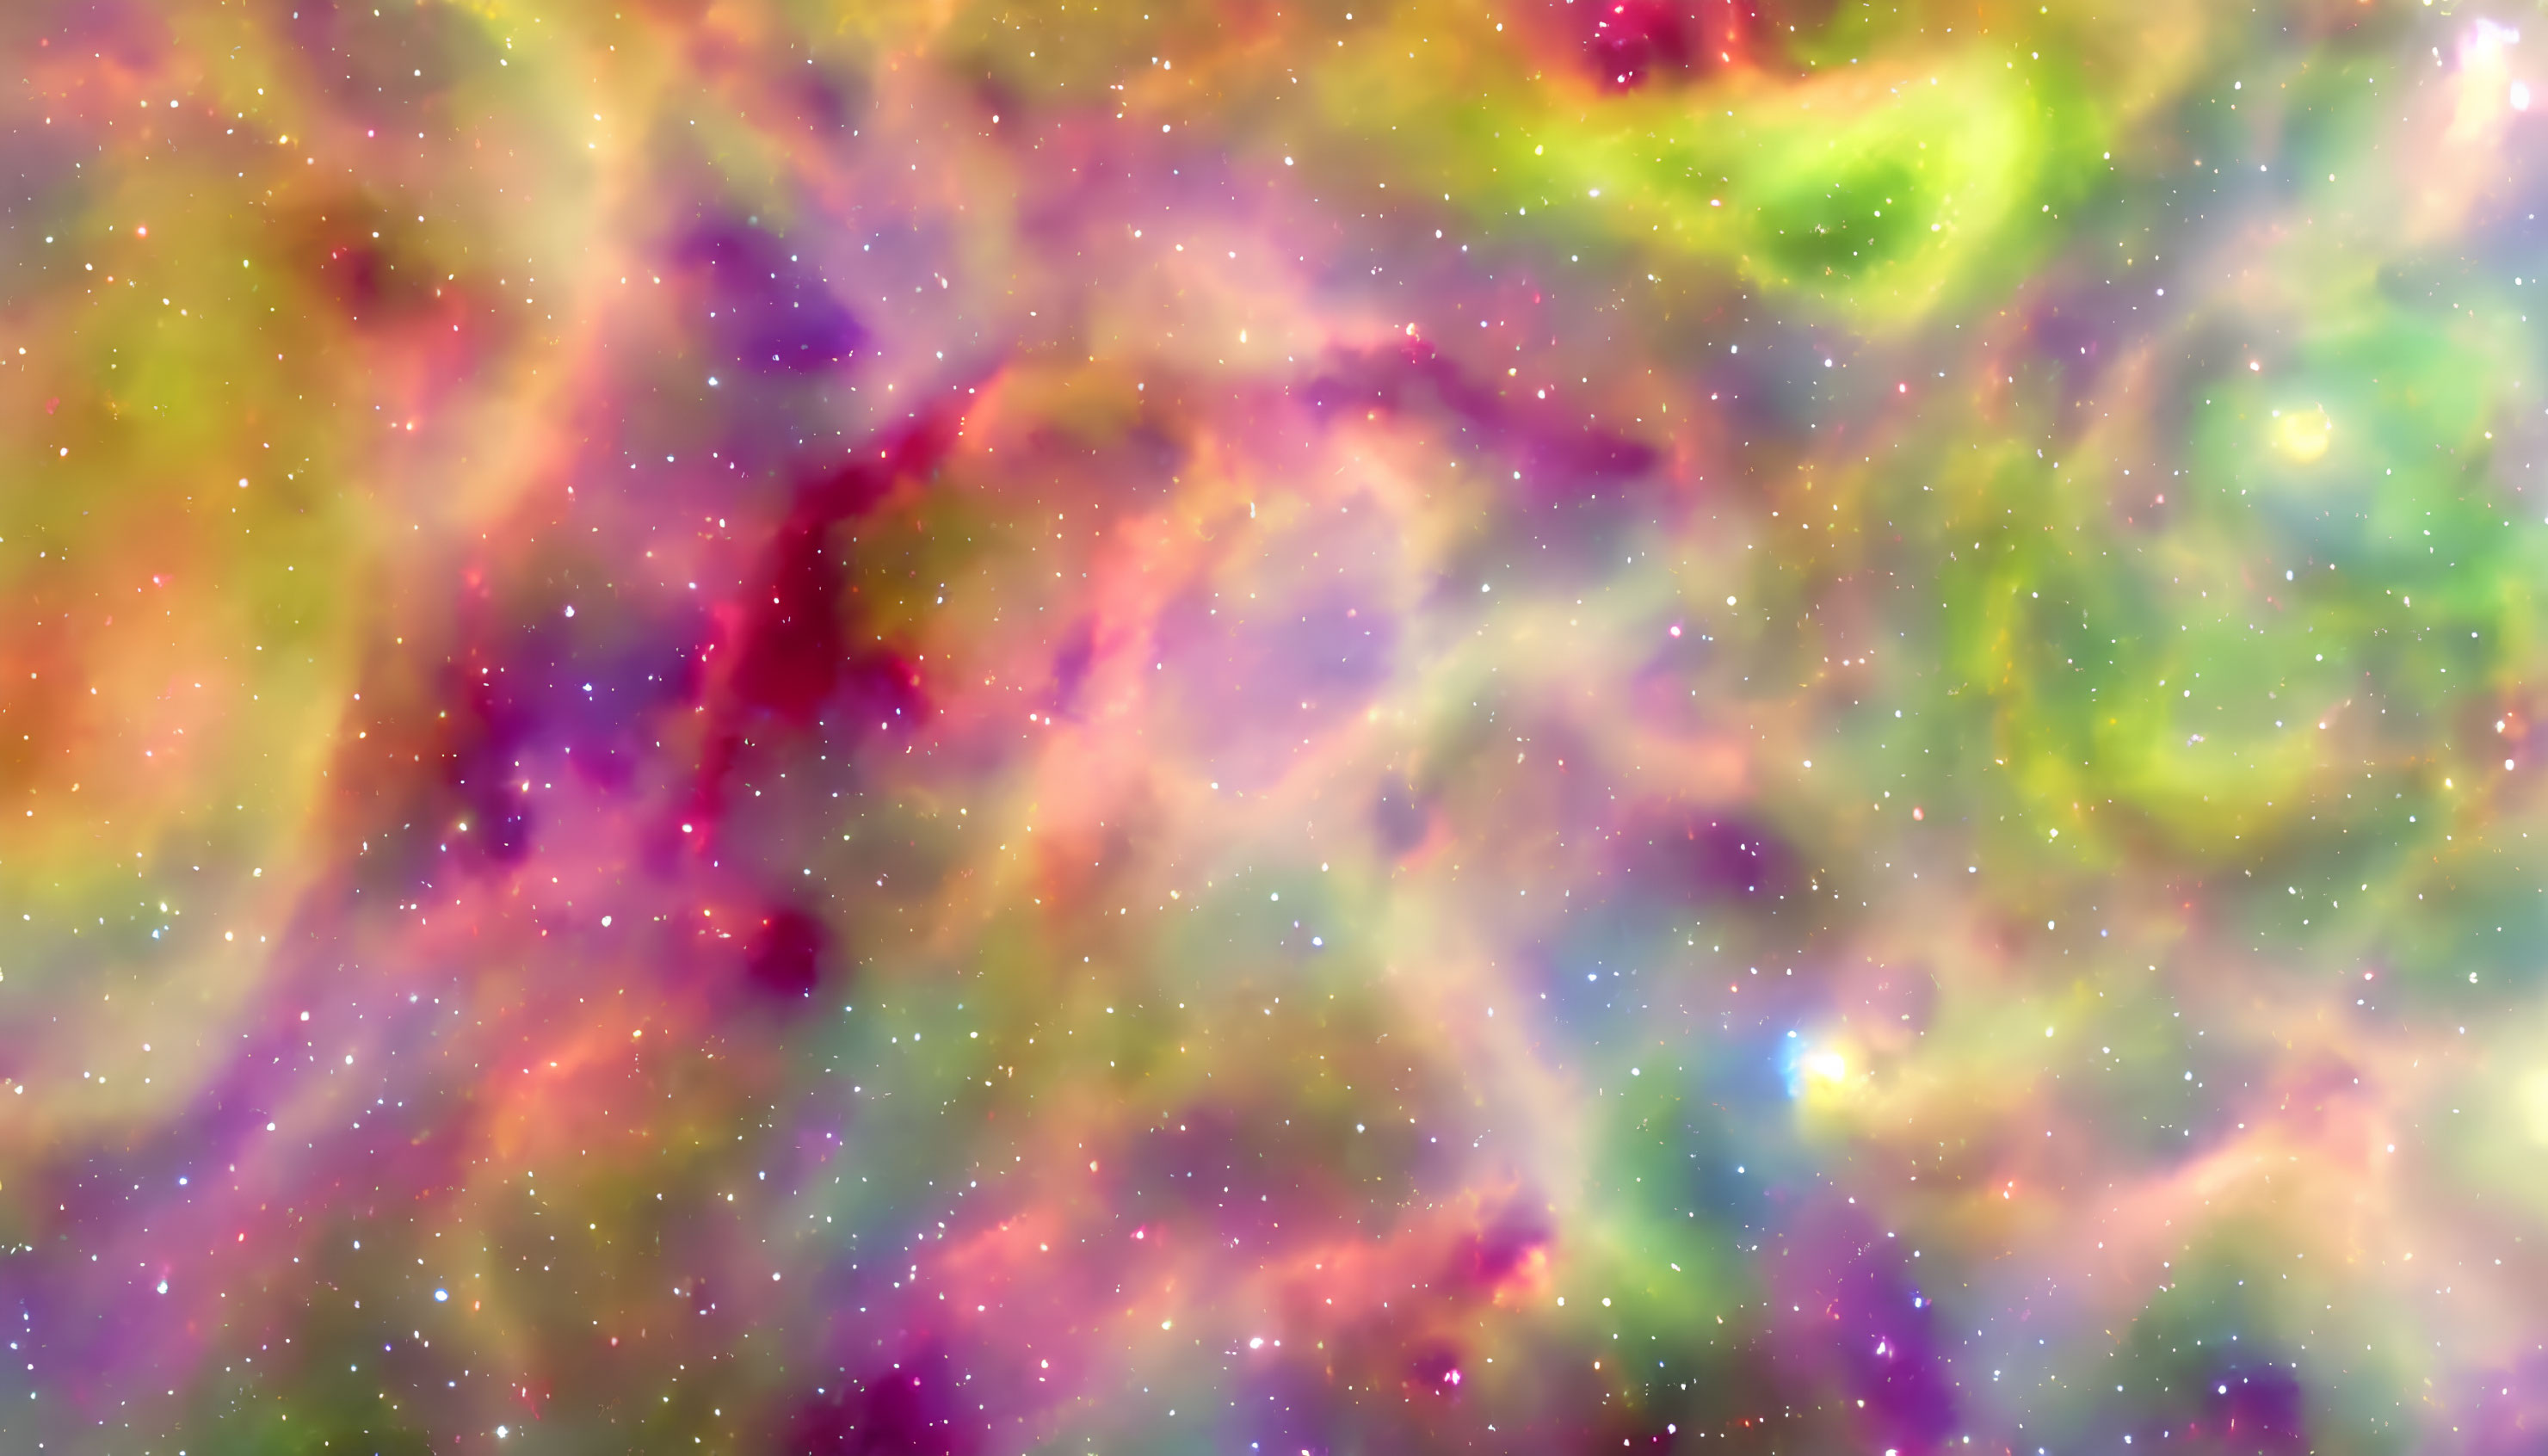 Colorful Nebula Image with Swirling Purple, Pink, Green, and Yellow Hues